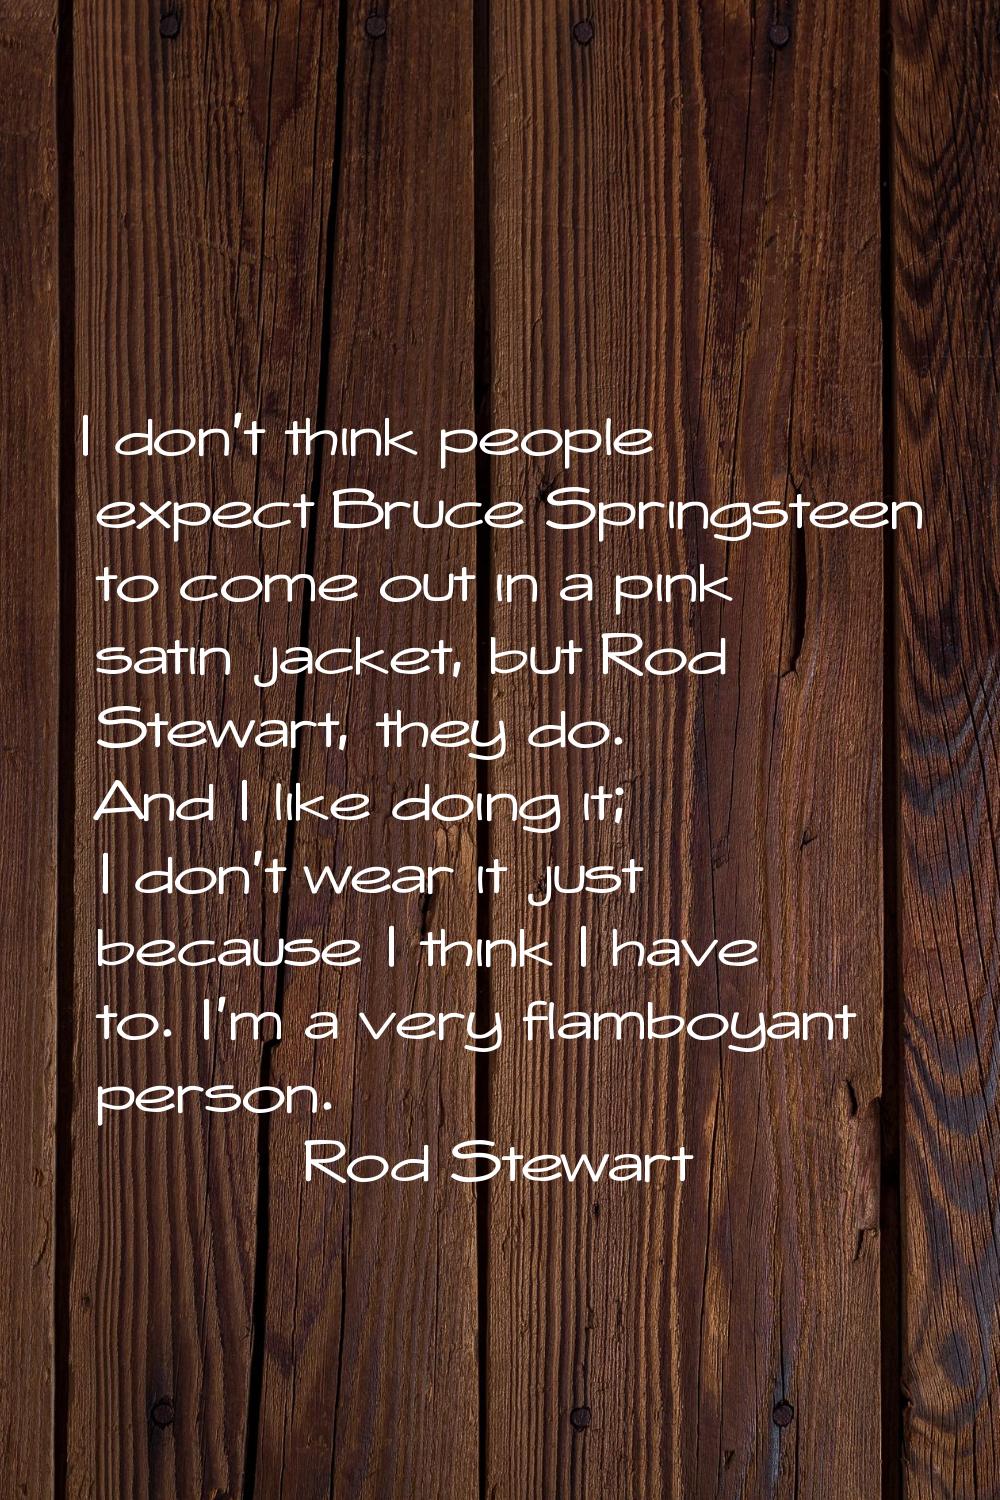 I don't think people expect Bruce Springsteen to come out in a pink satin jacket, but Rod Stewart, 